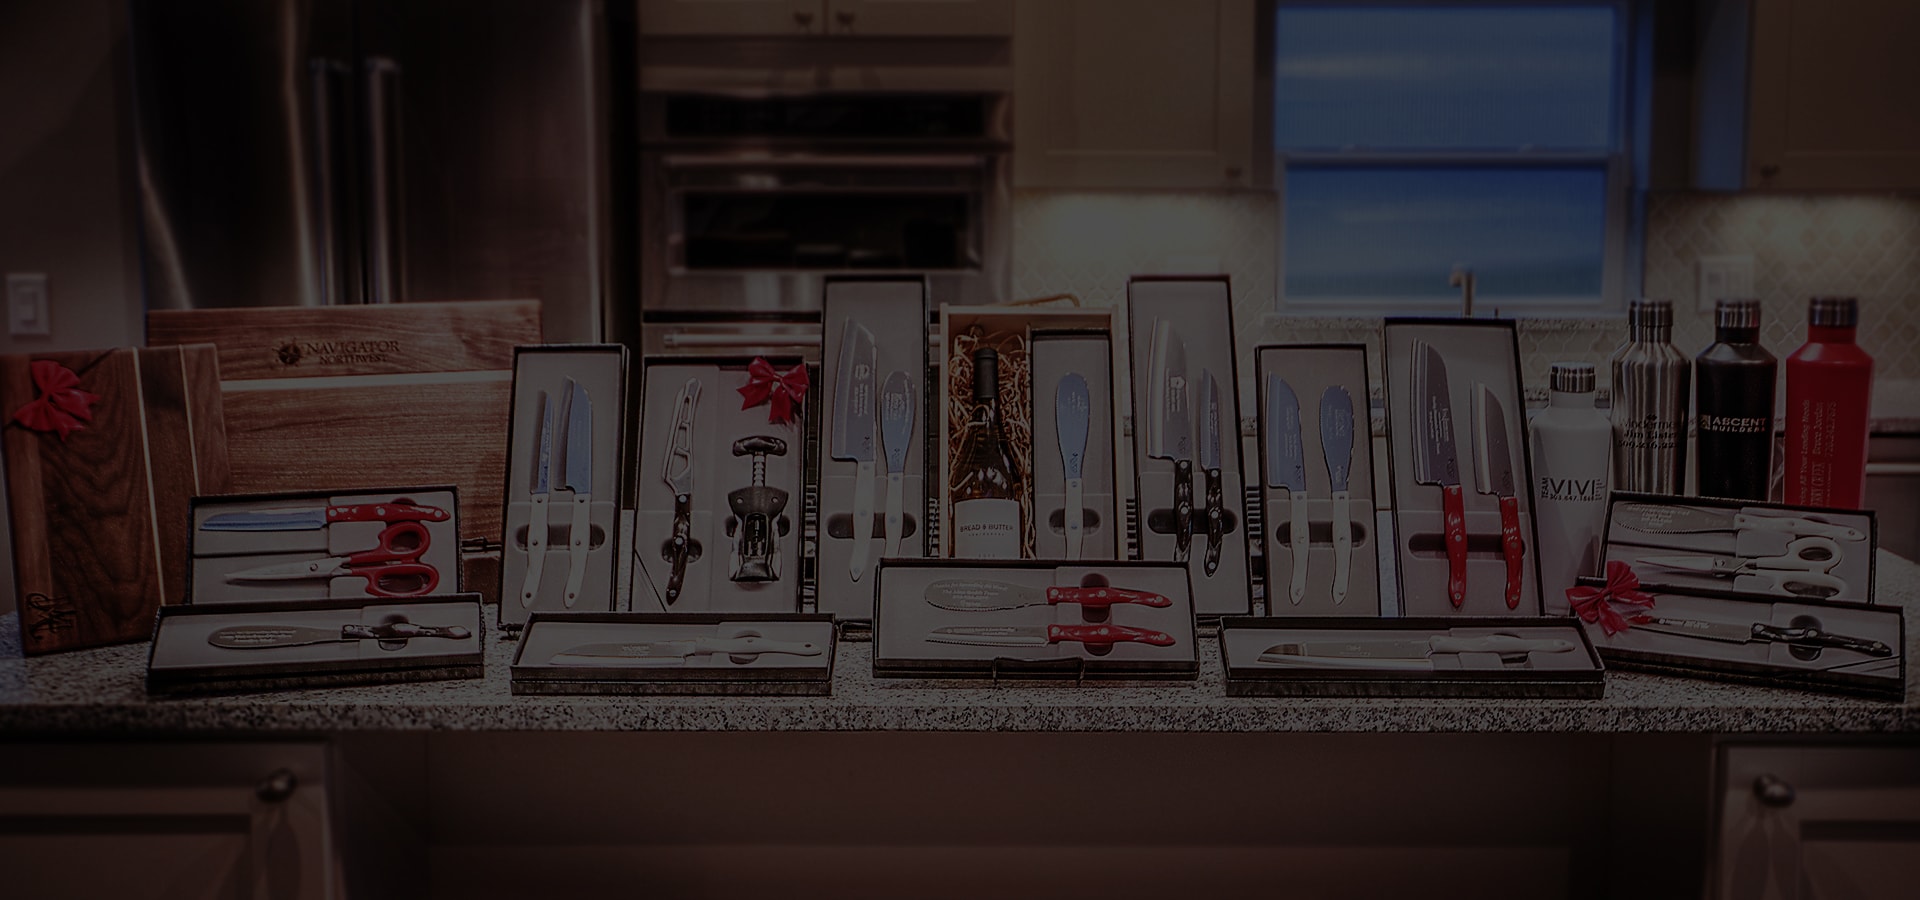 Lineup of top closing gifts in a custom kitchen.